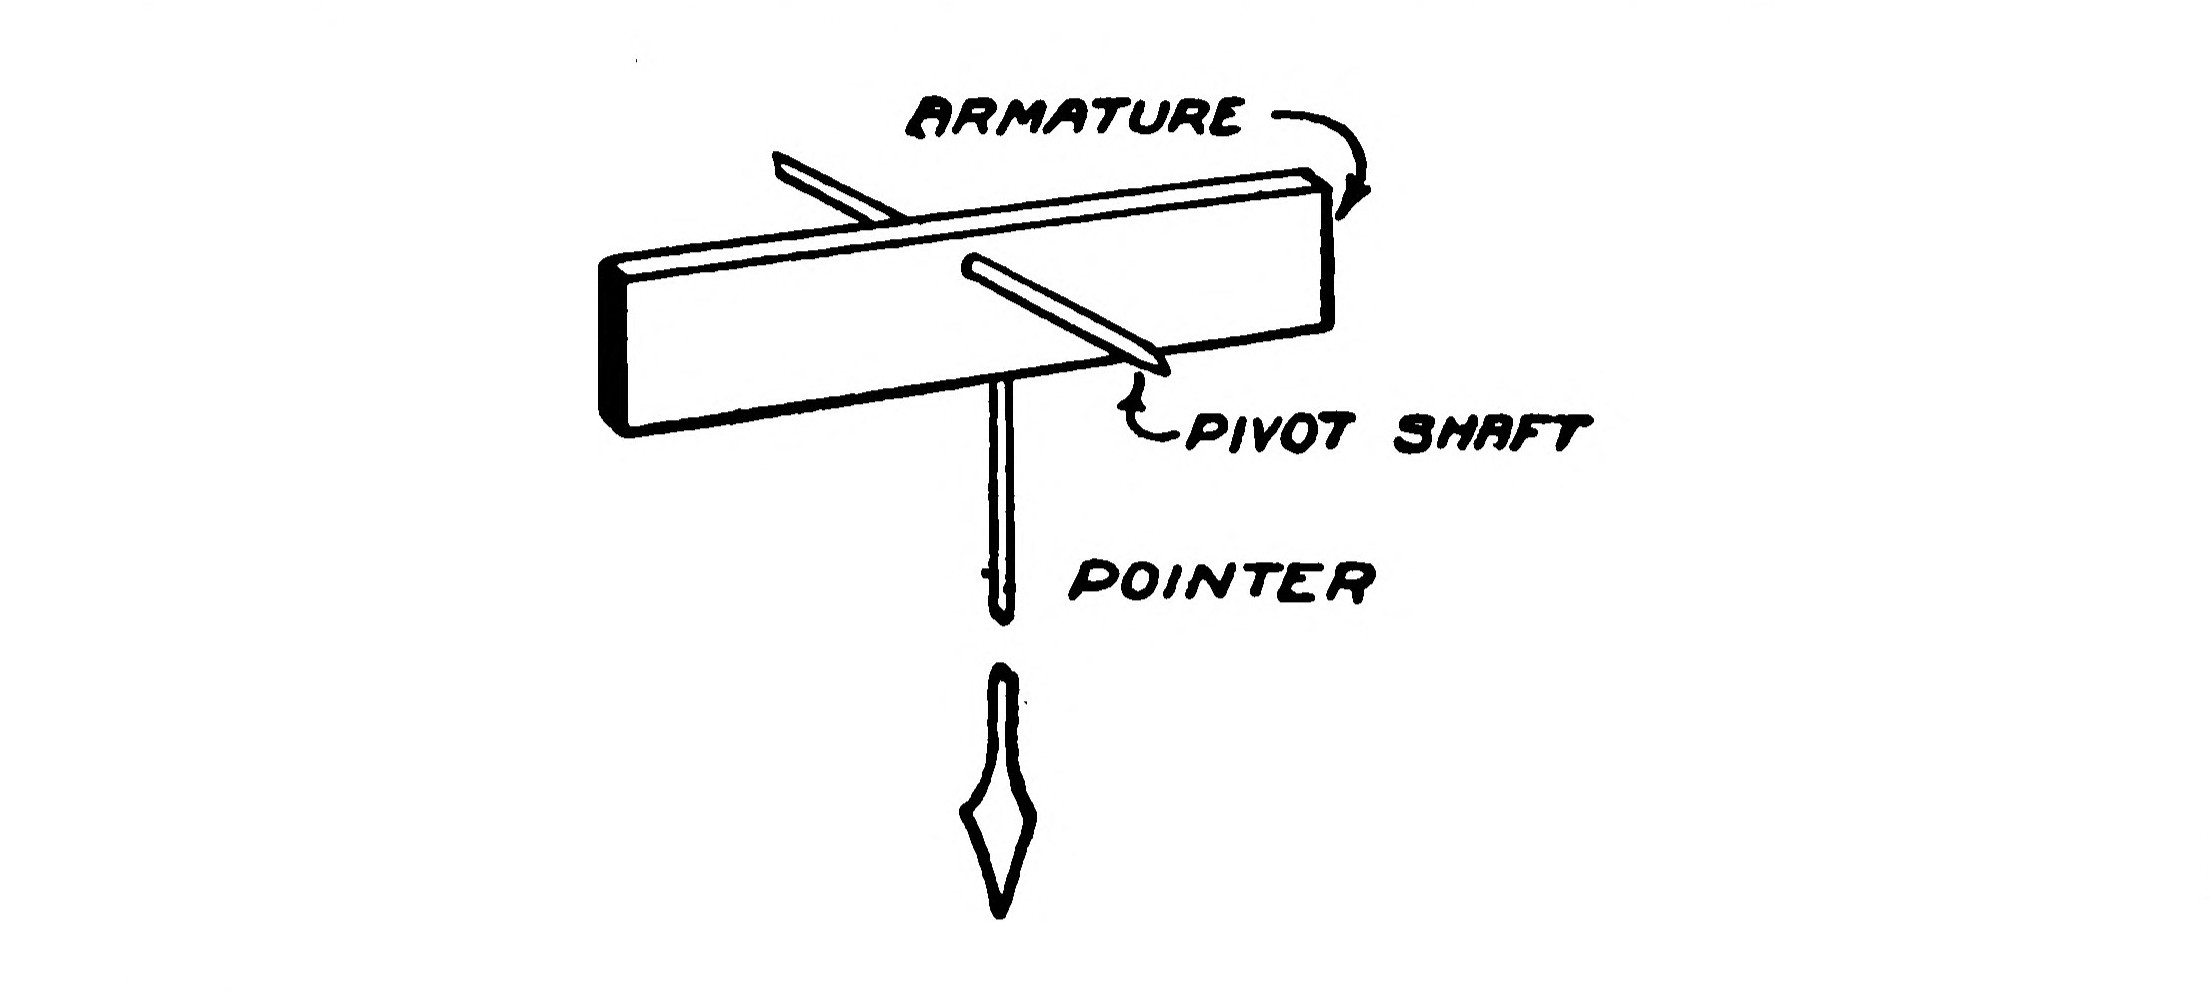 FIG. 72.—Showing how the Armature, Shaft and Pointer are assembled for a Meter having the Scale at the bottom.